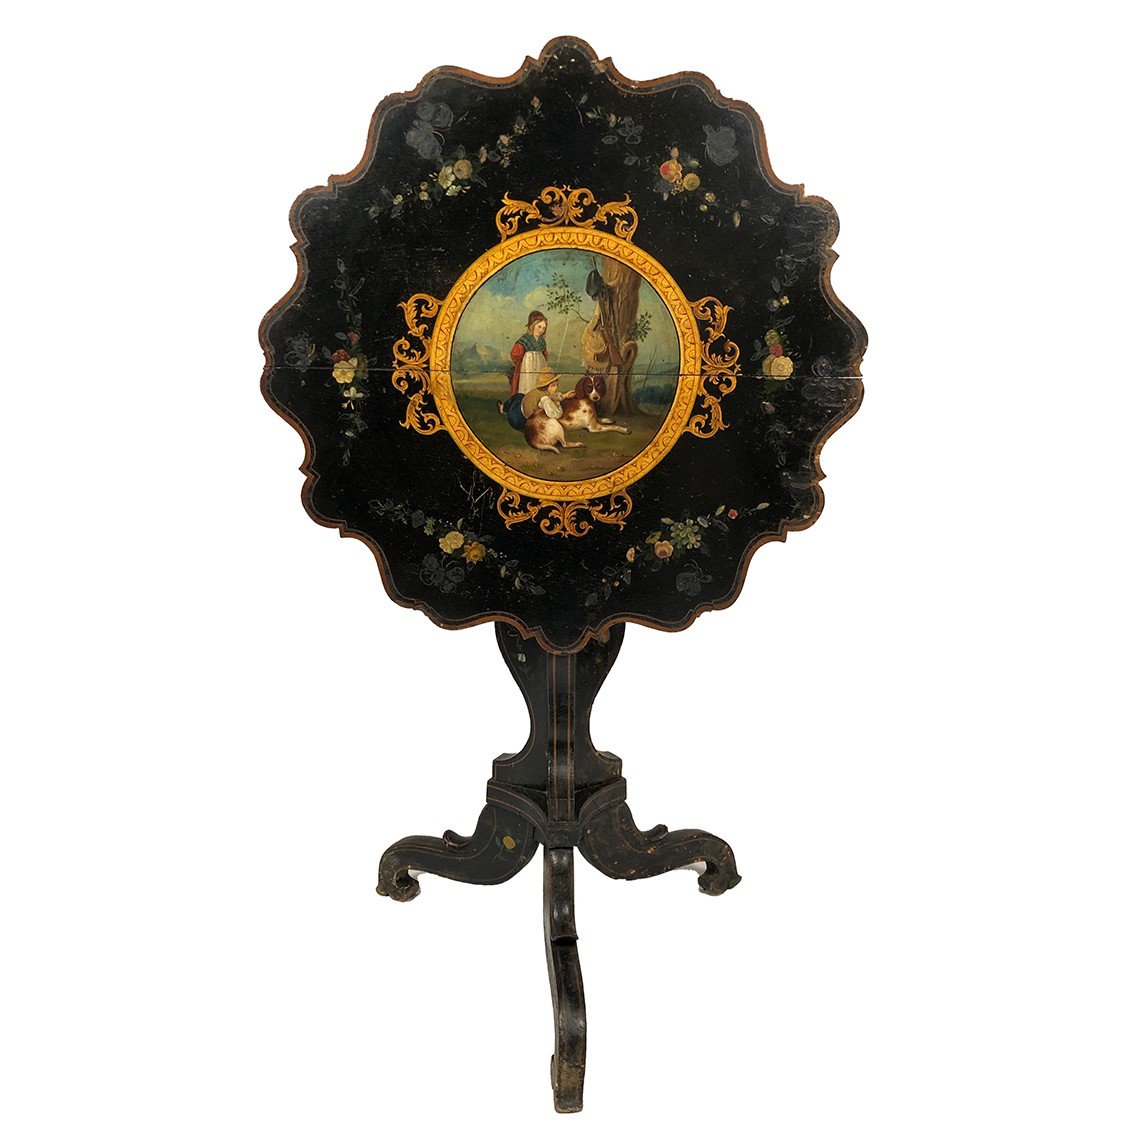 Tilting Pedestal Table With Scrolled Top Decorated With A Painted Central Medallion, Napoleon III Period